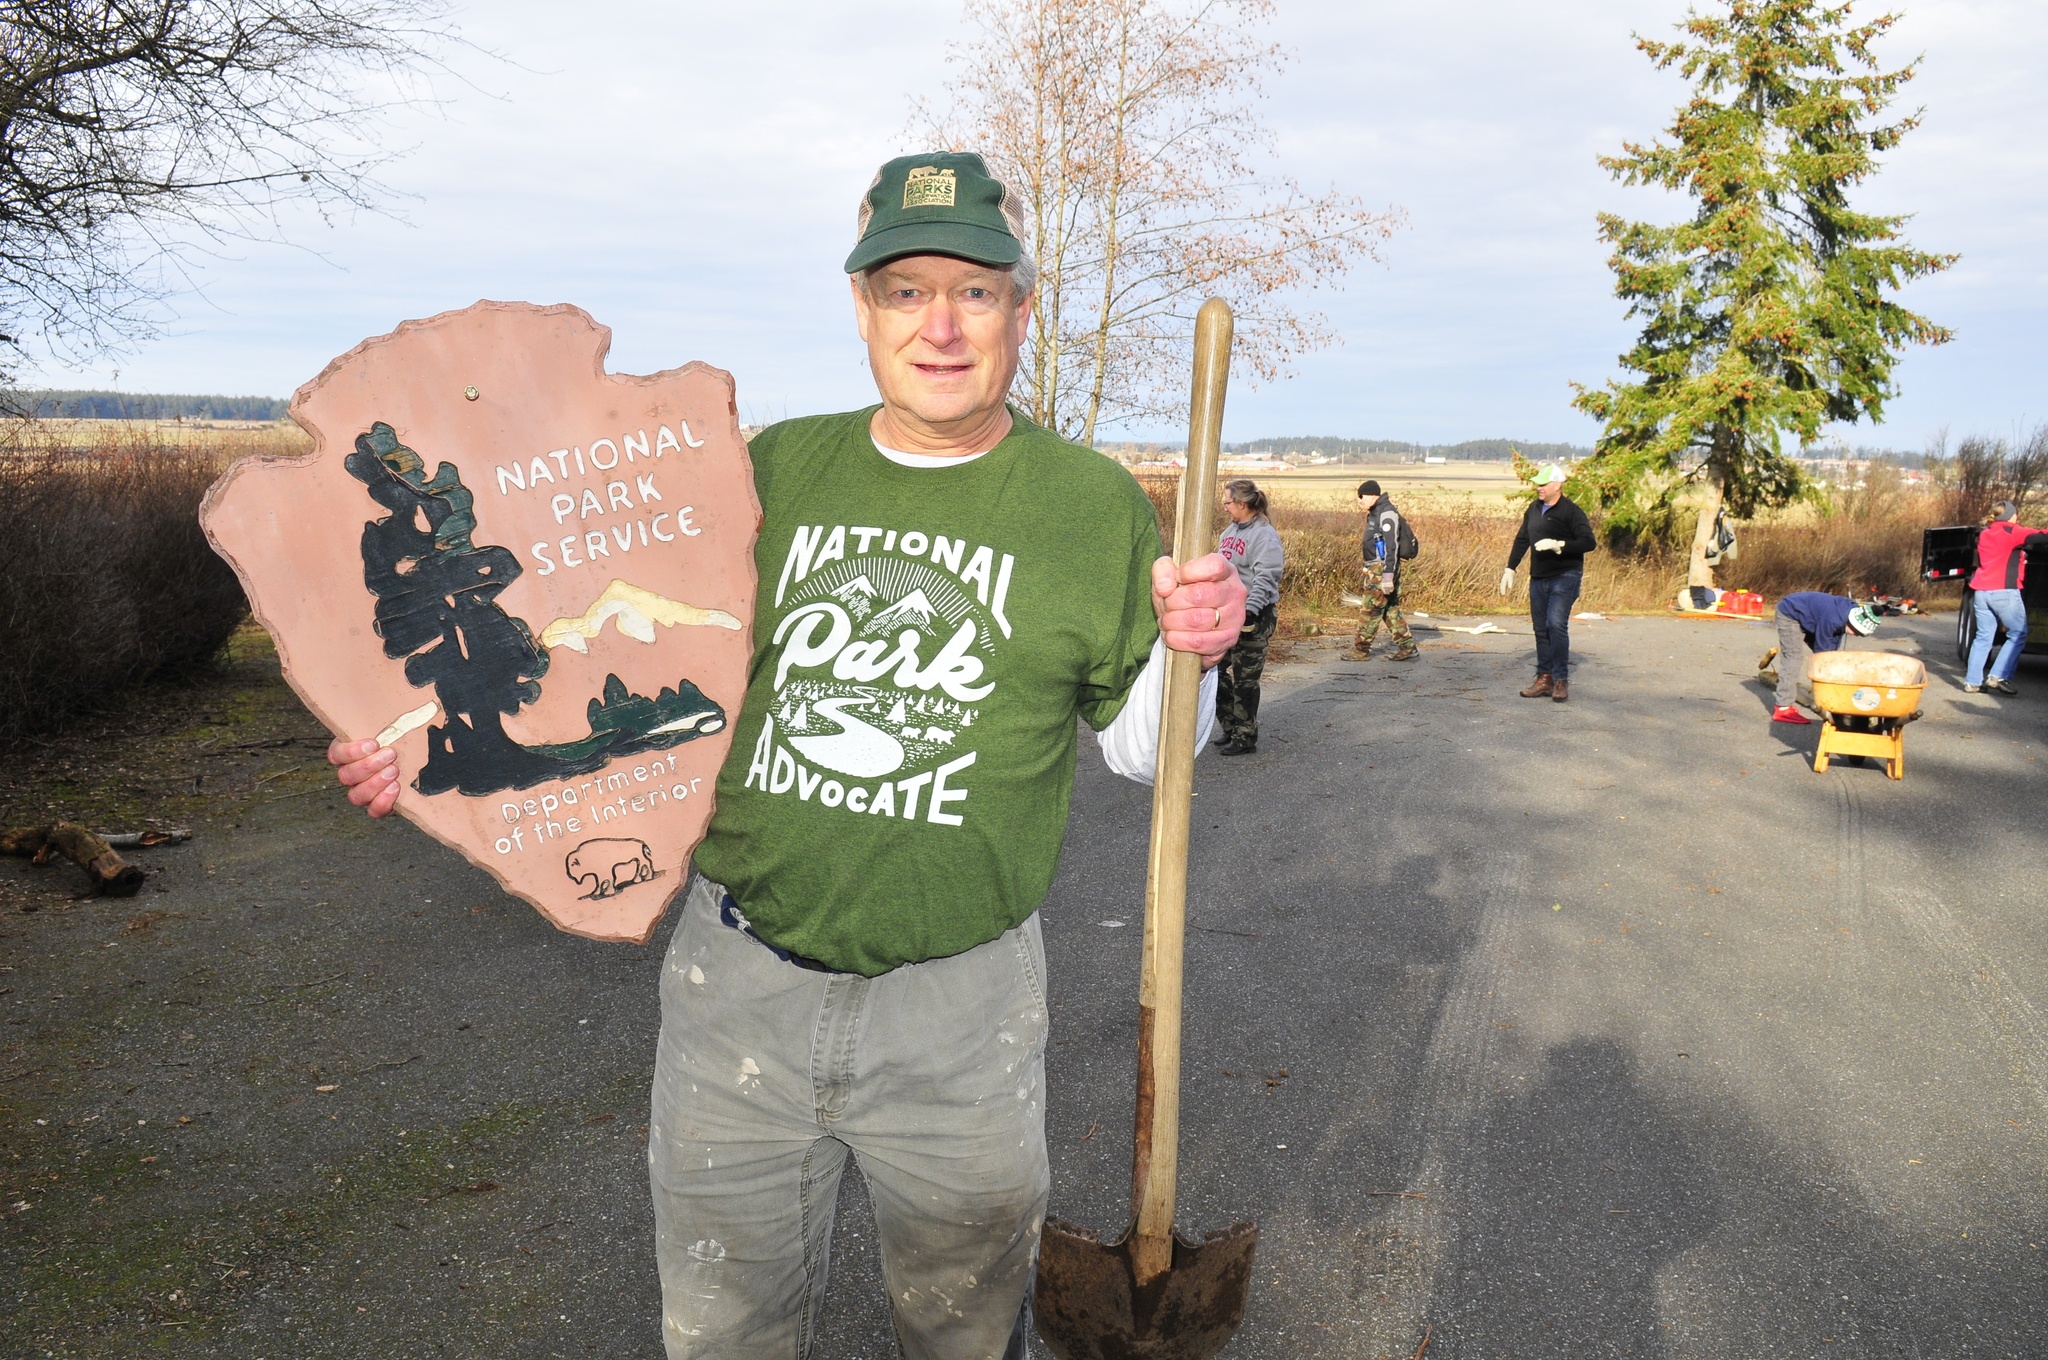 Rob Smith, a member of the National Parks Conservation Association holds up a dilapidated National Park Service sign and a broken shovel Monday, at Prairie Wayside in Coupeville, to show the condition of many things in need of repair or replacement in the National Park System. Smith and the NPCA were participating in a partner volunteer project along with Mission Continues, a veterans and active duty service members who spent their Martin Luther King holiday donating their time and work to the community. Photo by Michael Watkins/Whidbey News-Times